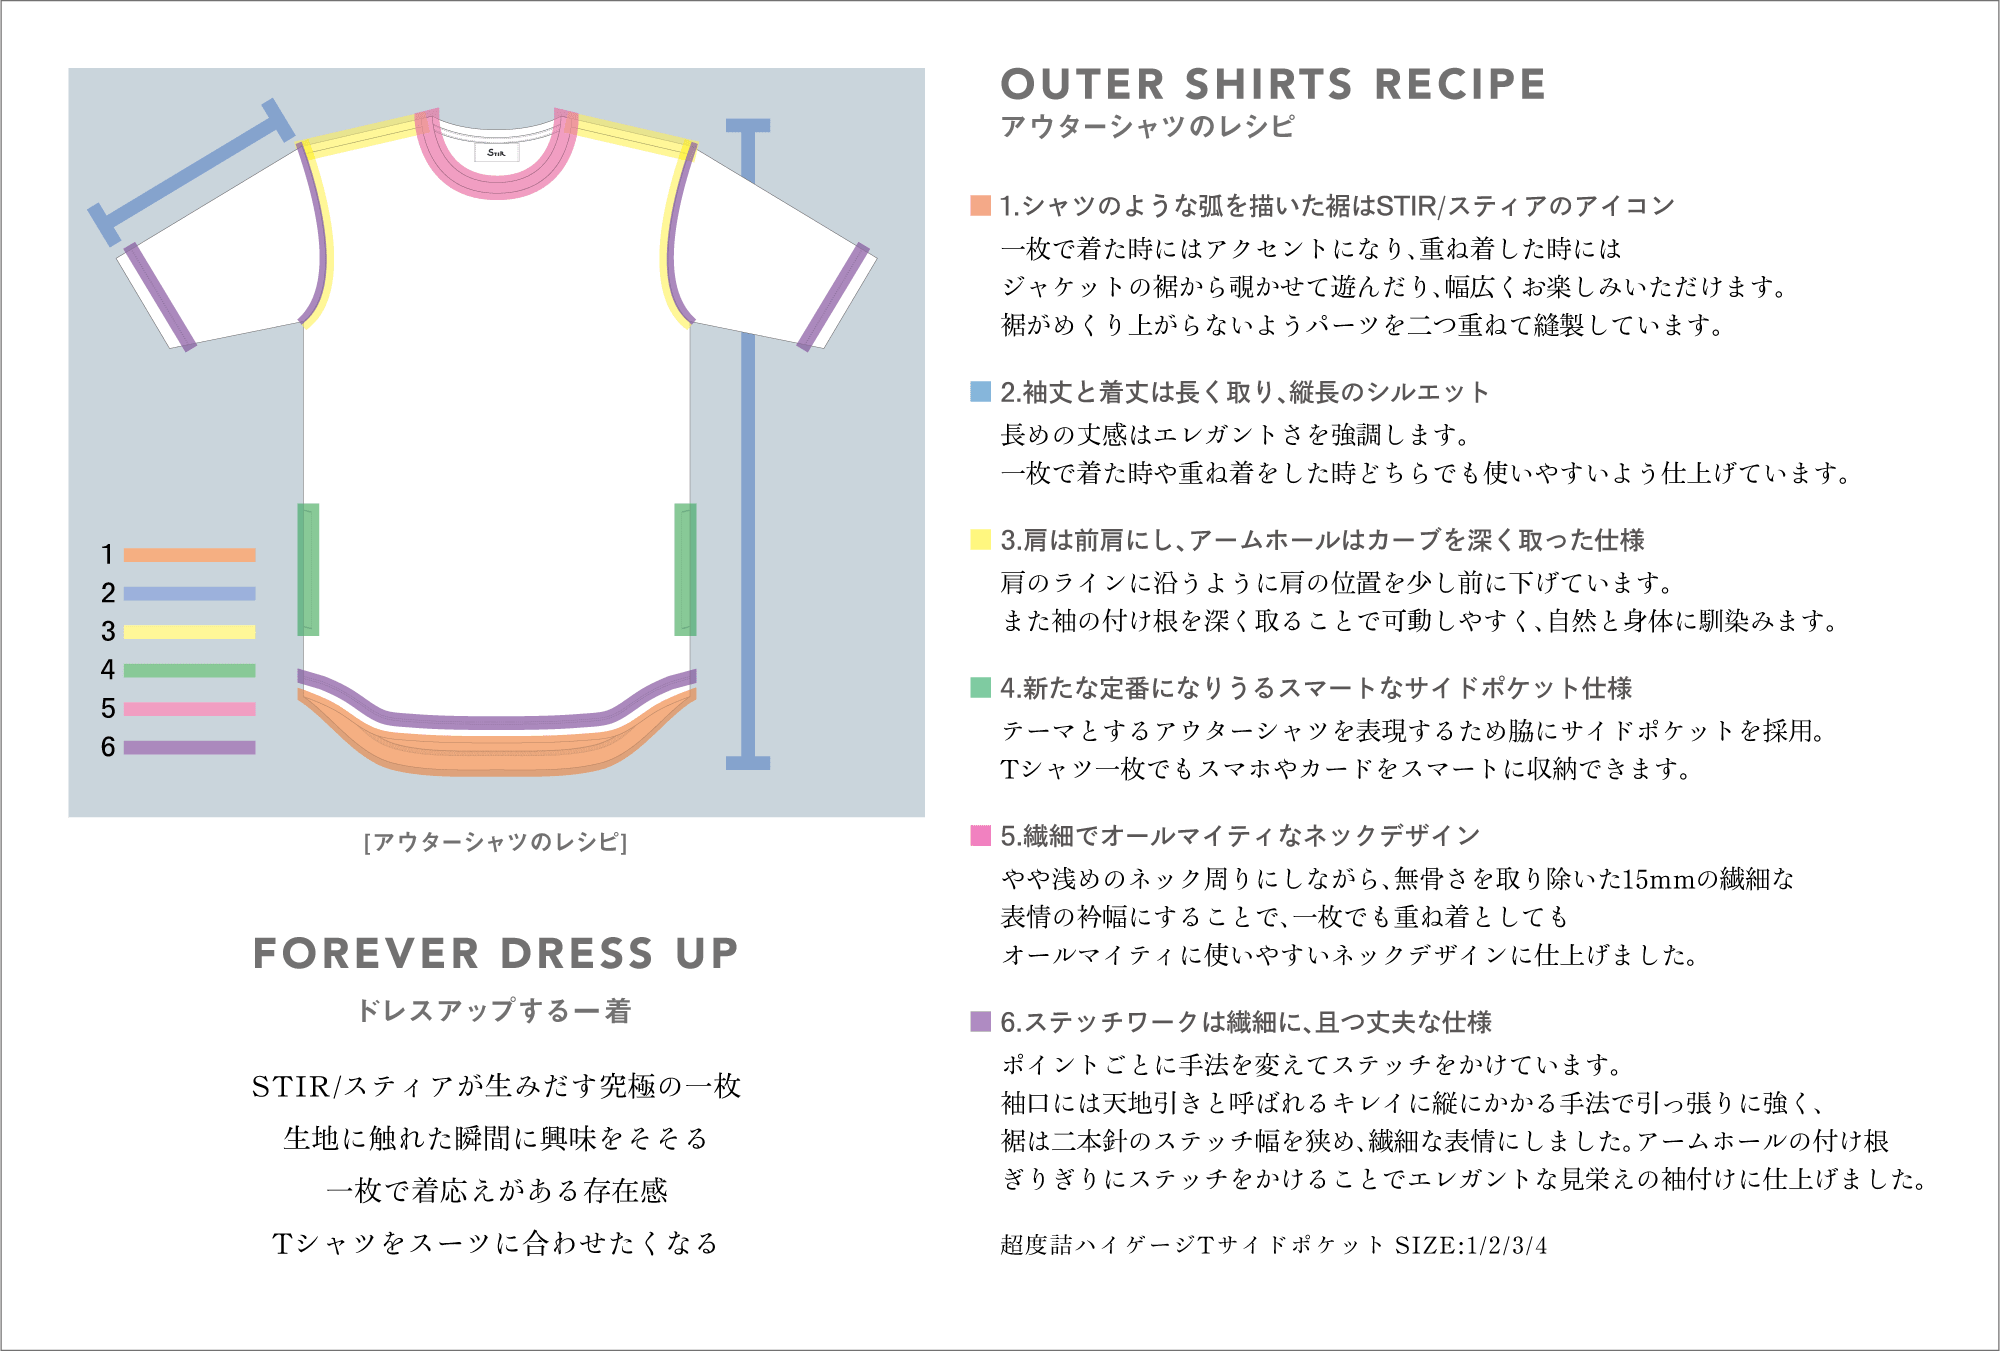 OUTER SHIRTS RECIPE